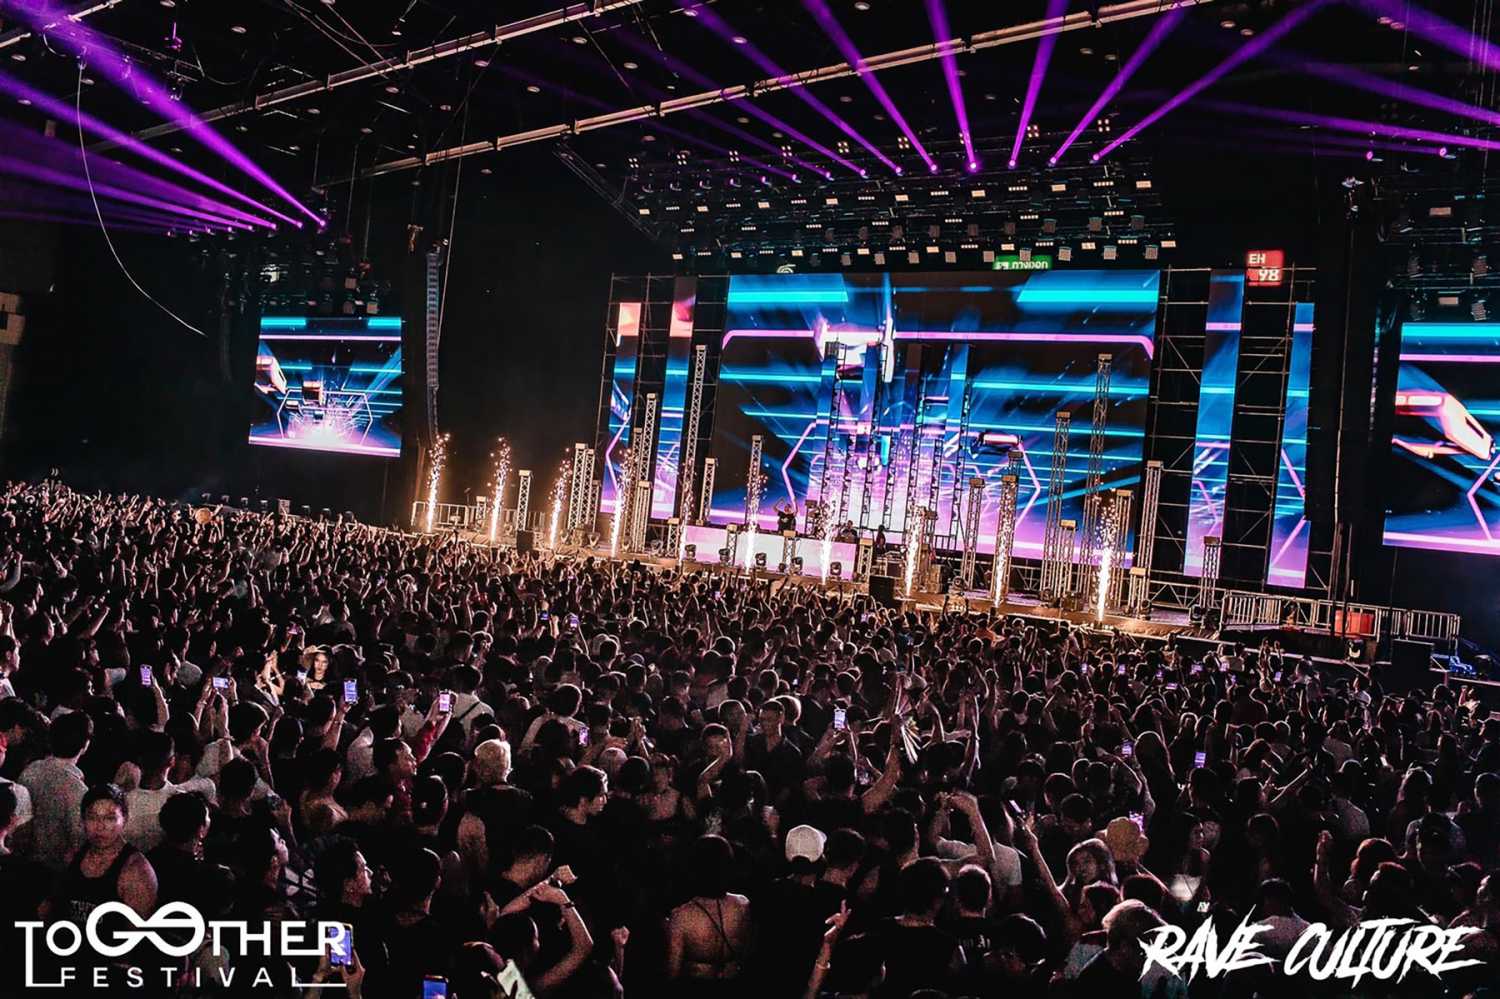 Bangkok’s Together Festival returned after a two-edition hiatus